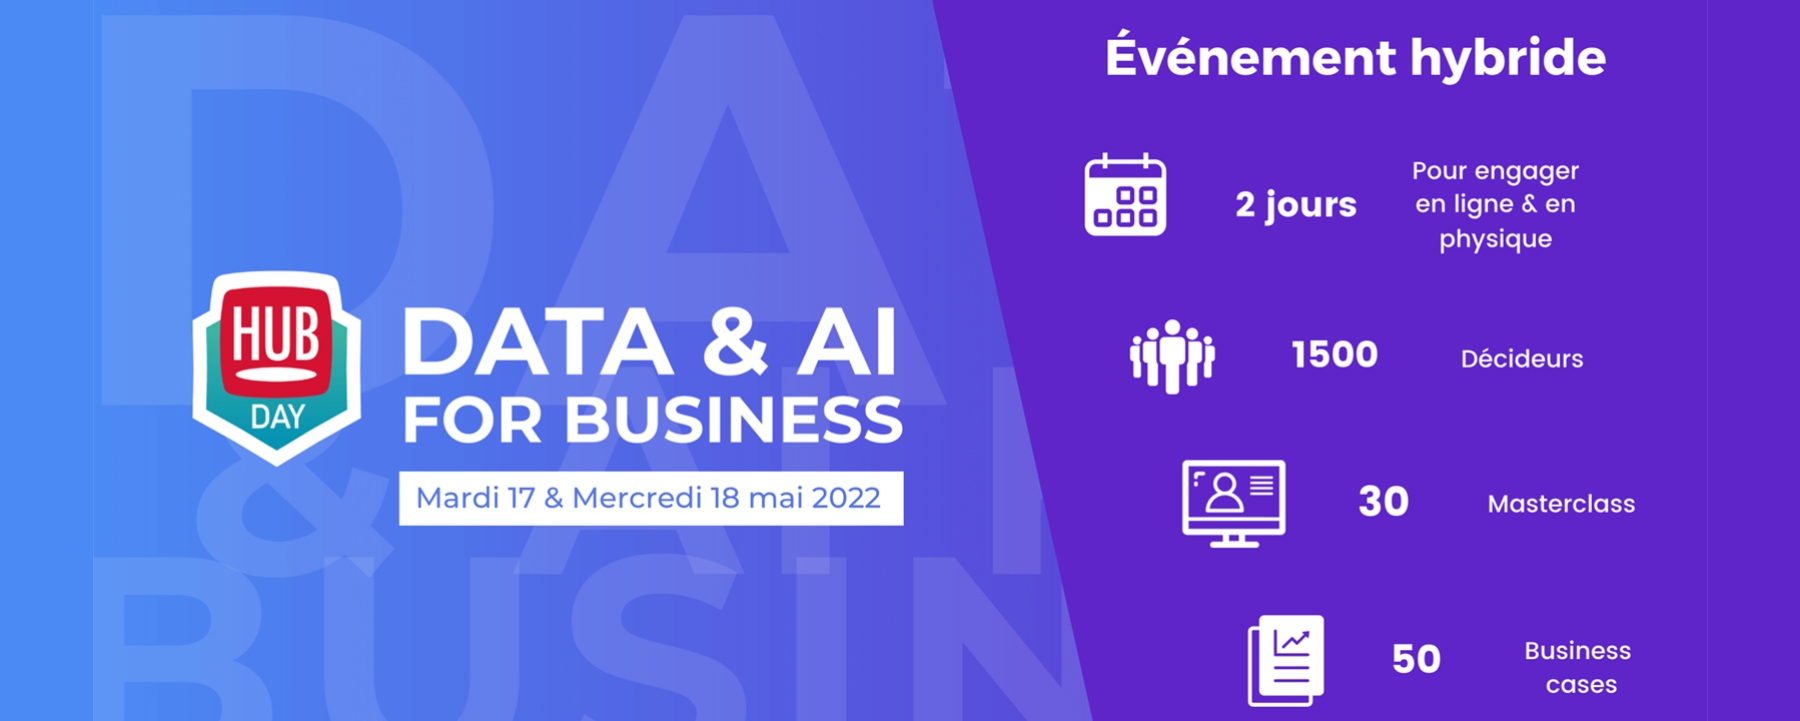 DATA & AI FOR BUSINESS